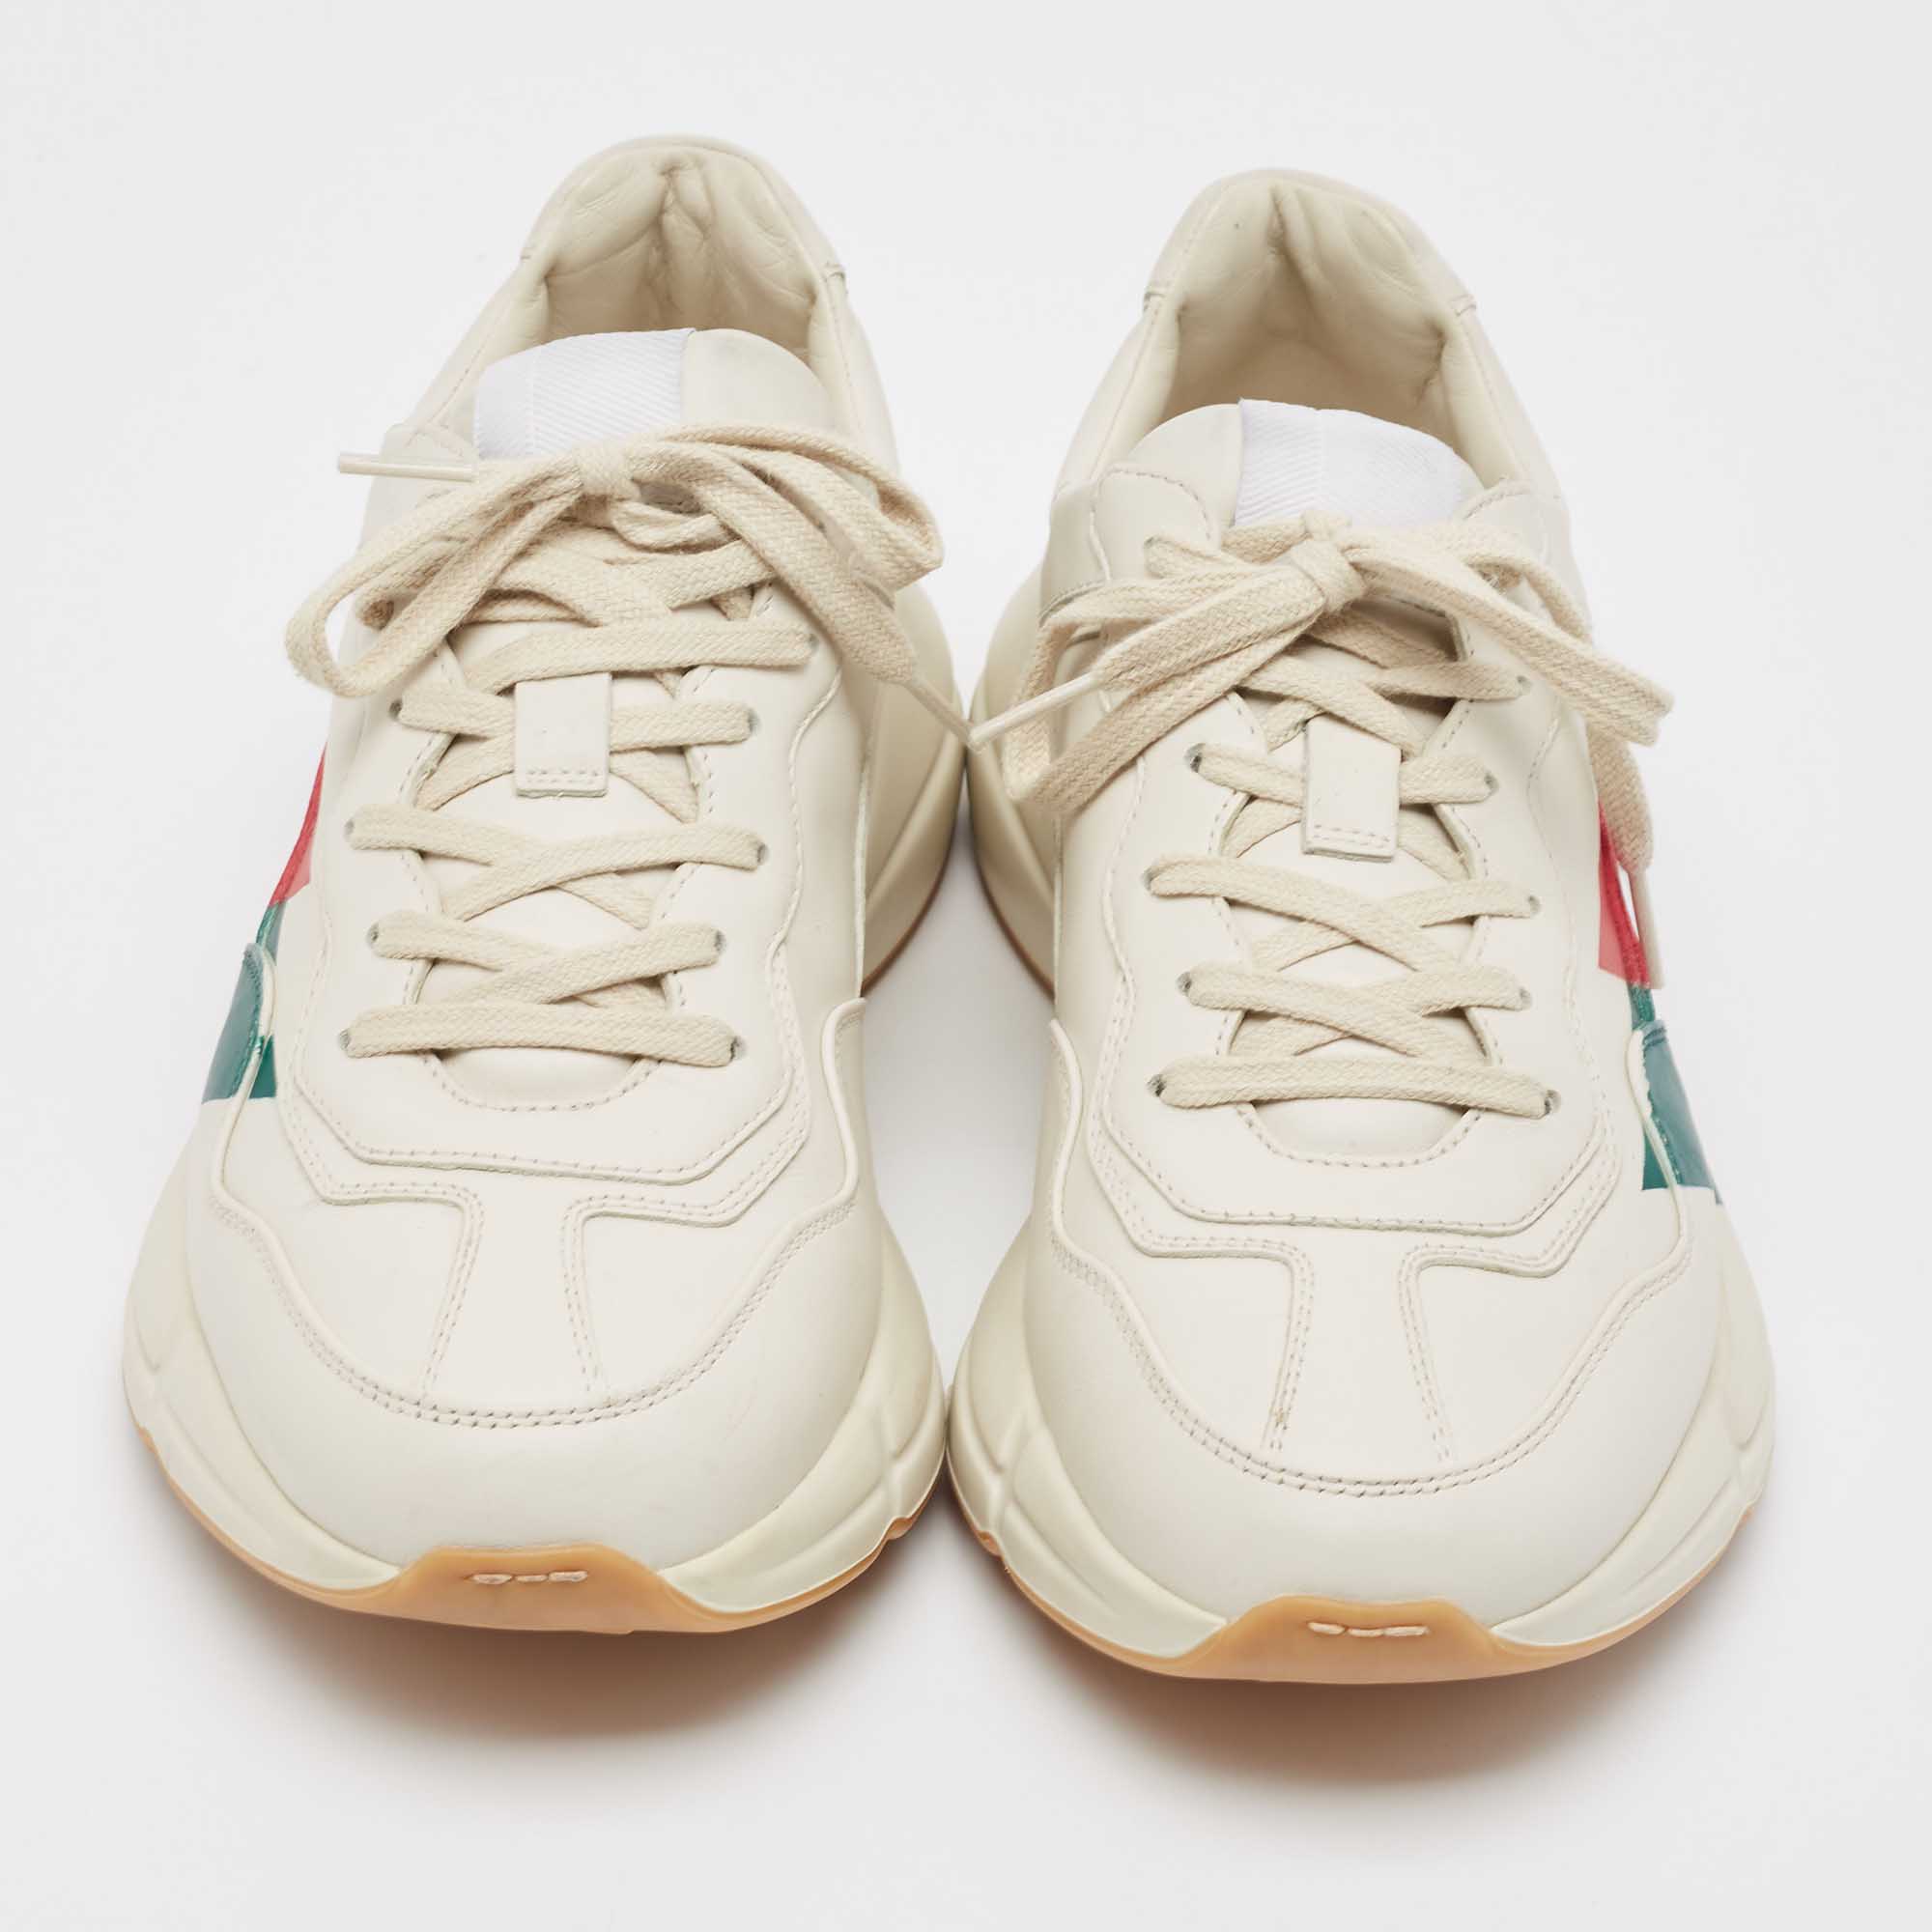 Gucci Cream Leather Web Print Rhyton Sneakers Size 41